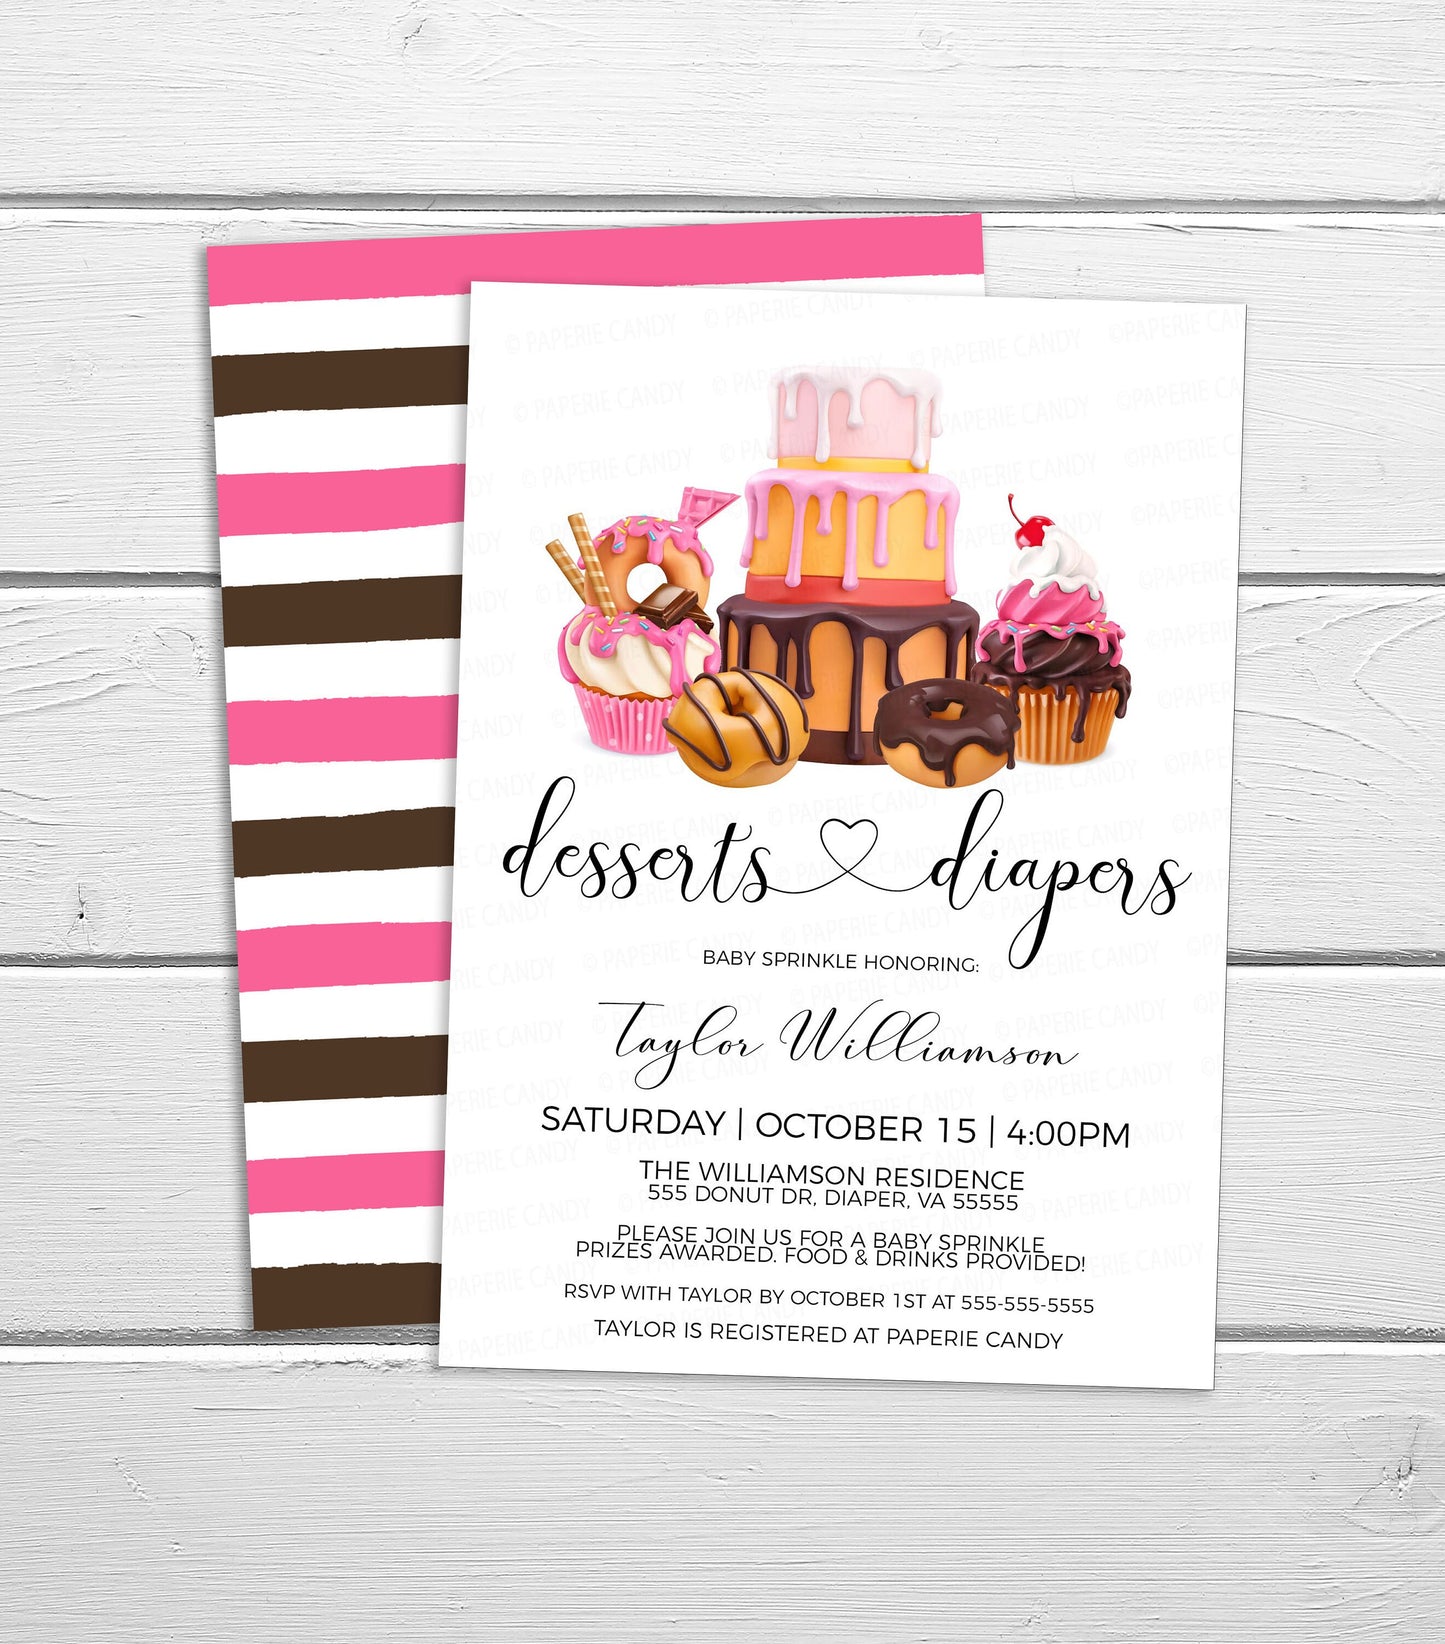 Girl Baby Shower Invitation, Pink Brown Desserts And Diapers Invite, Donuts Baby Sprinkle, Girl Twins Sprinkled With Love Editable Printable